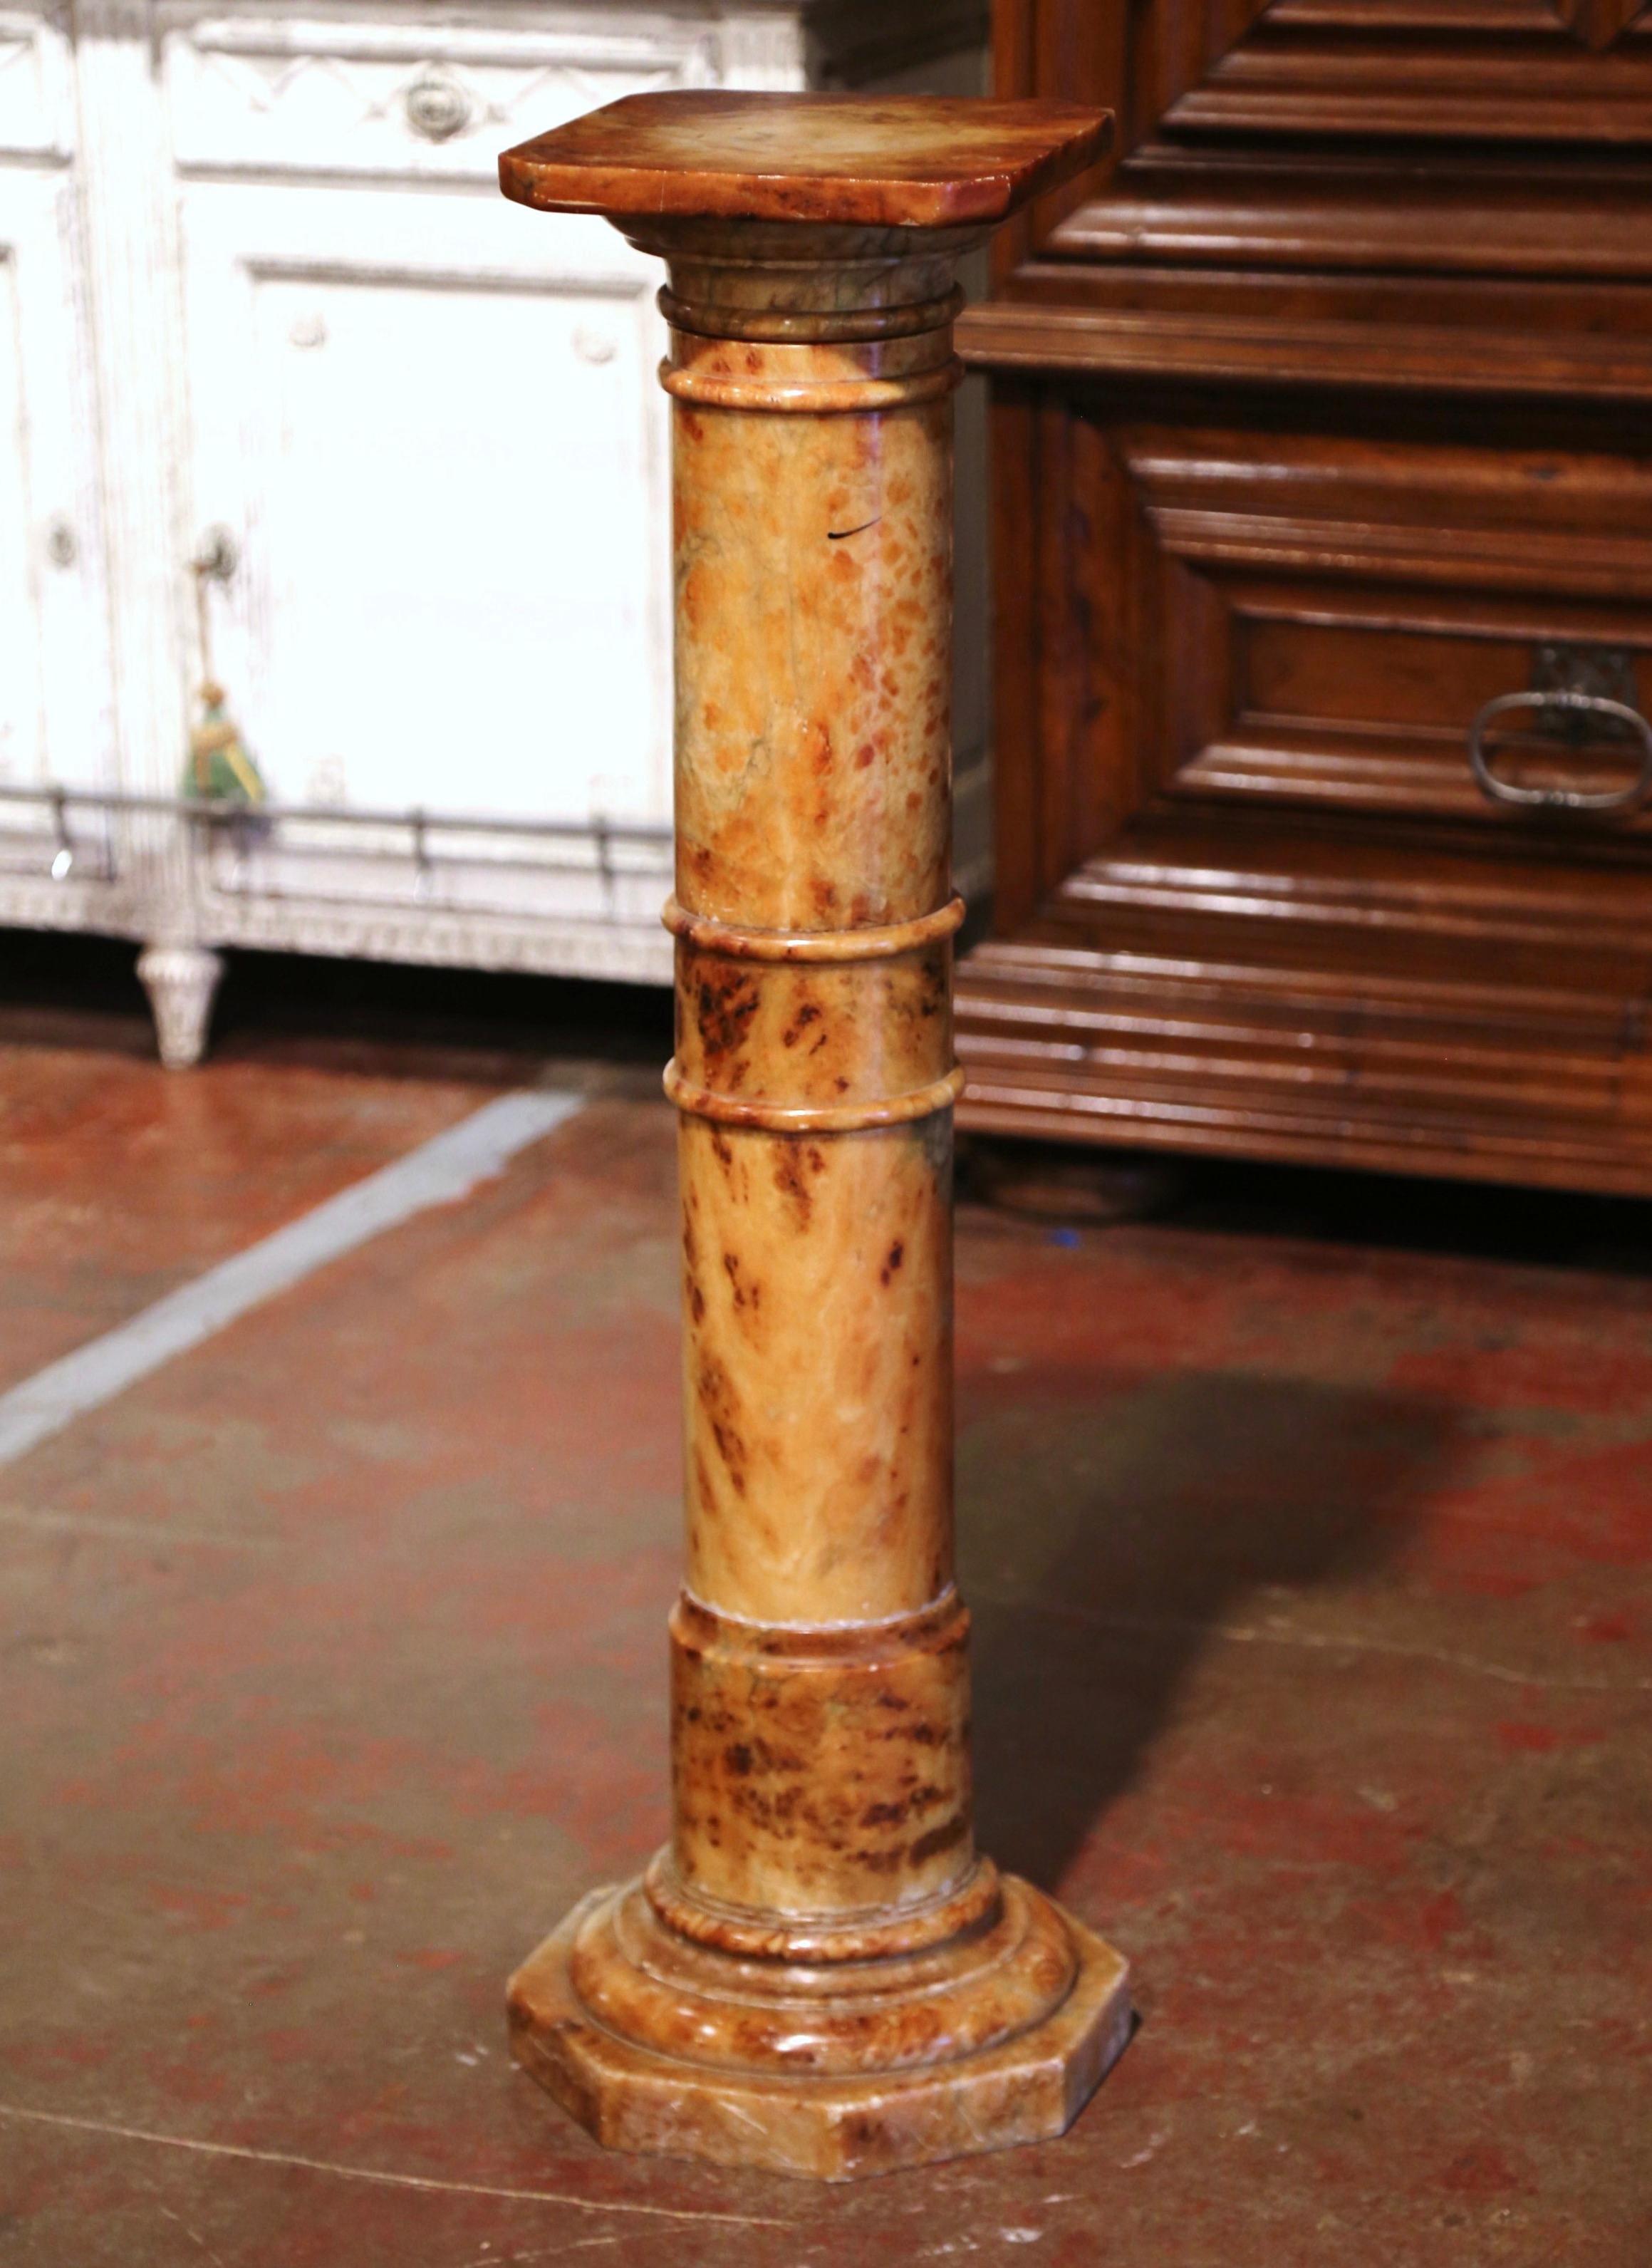 This elegant antique pedestal was crafted in France, circa 1870. Made of variegated marble, the display piece stands on a sturdy octagonal double plinth base over a round stem embellished with carved decor throughout. The surface is dressed with a